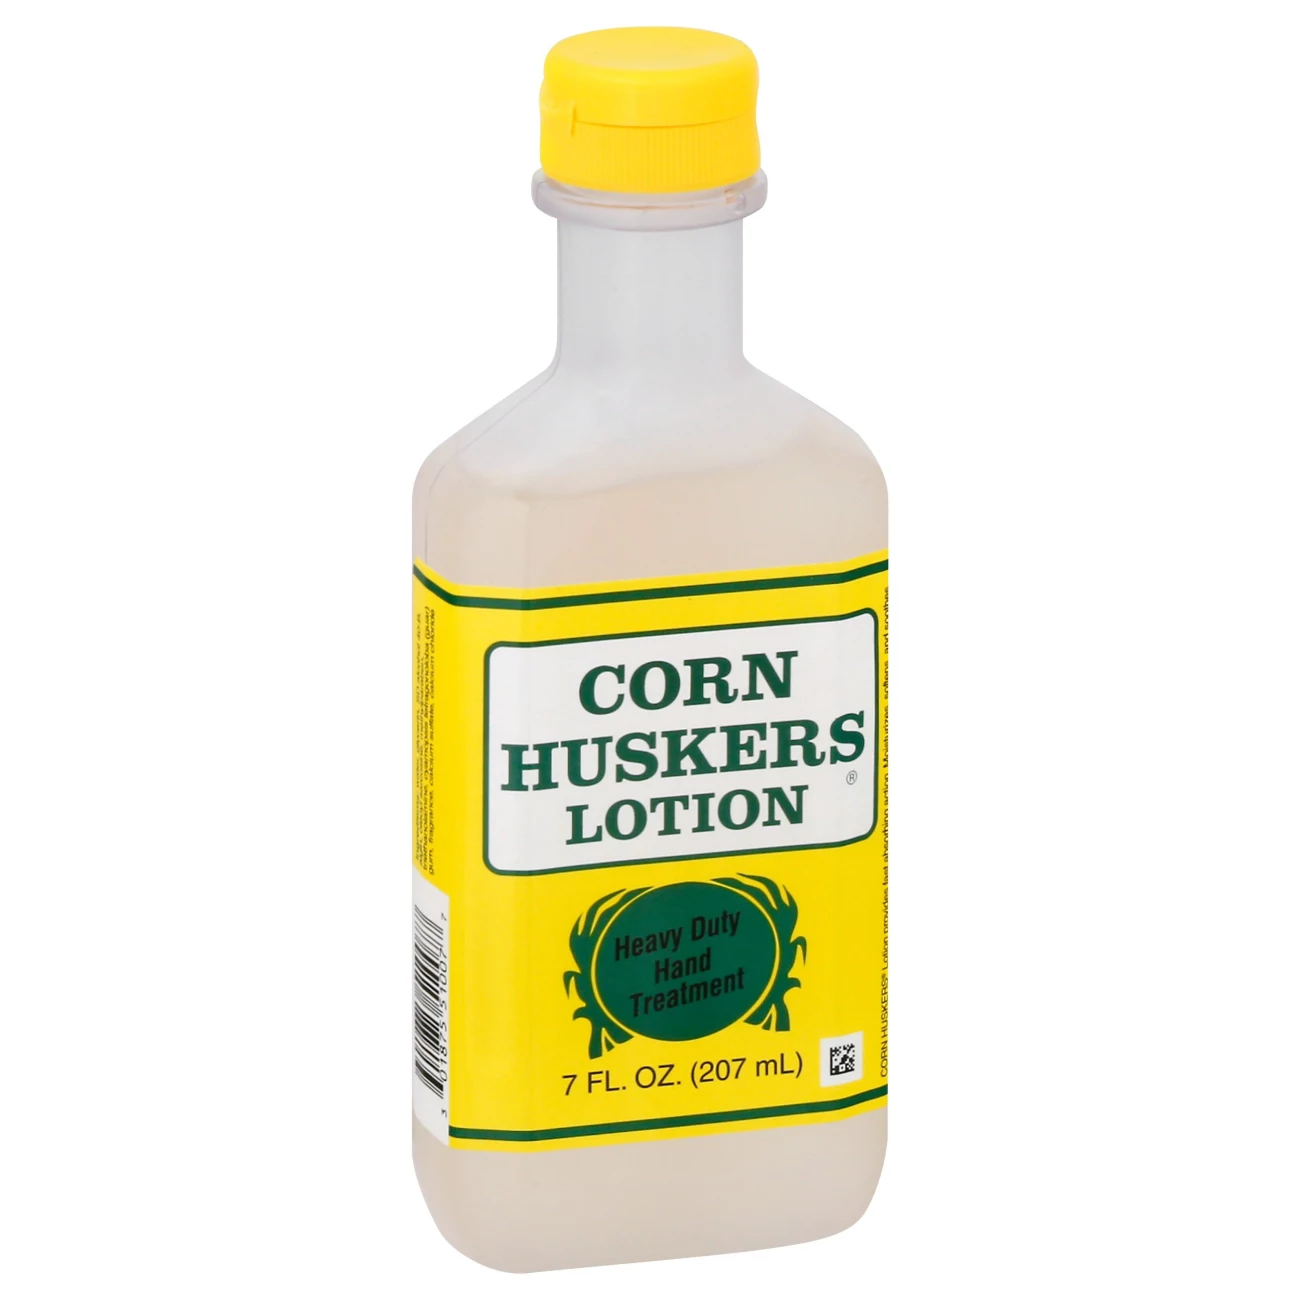 Cornhuskers Lotion: Moisturizing Skin Care for Lasting Hydration